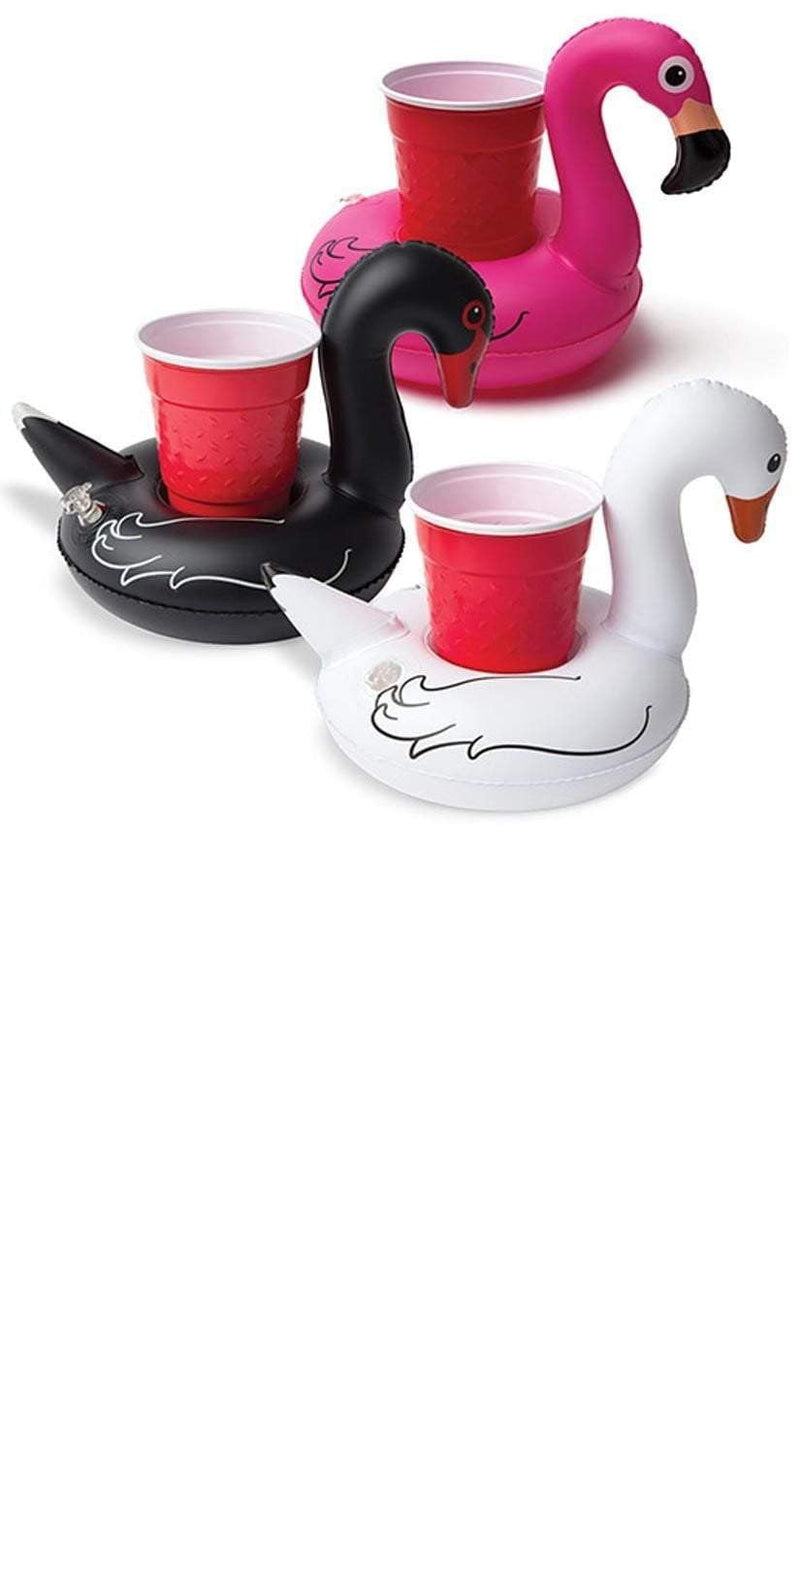 Big Mouth Tropical Birds Beverage Boats BMDF-0002: